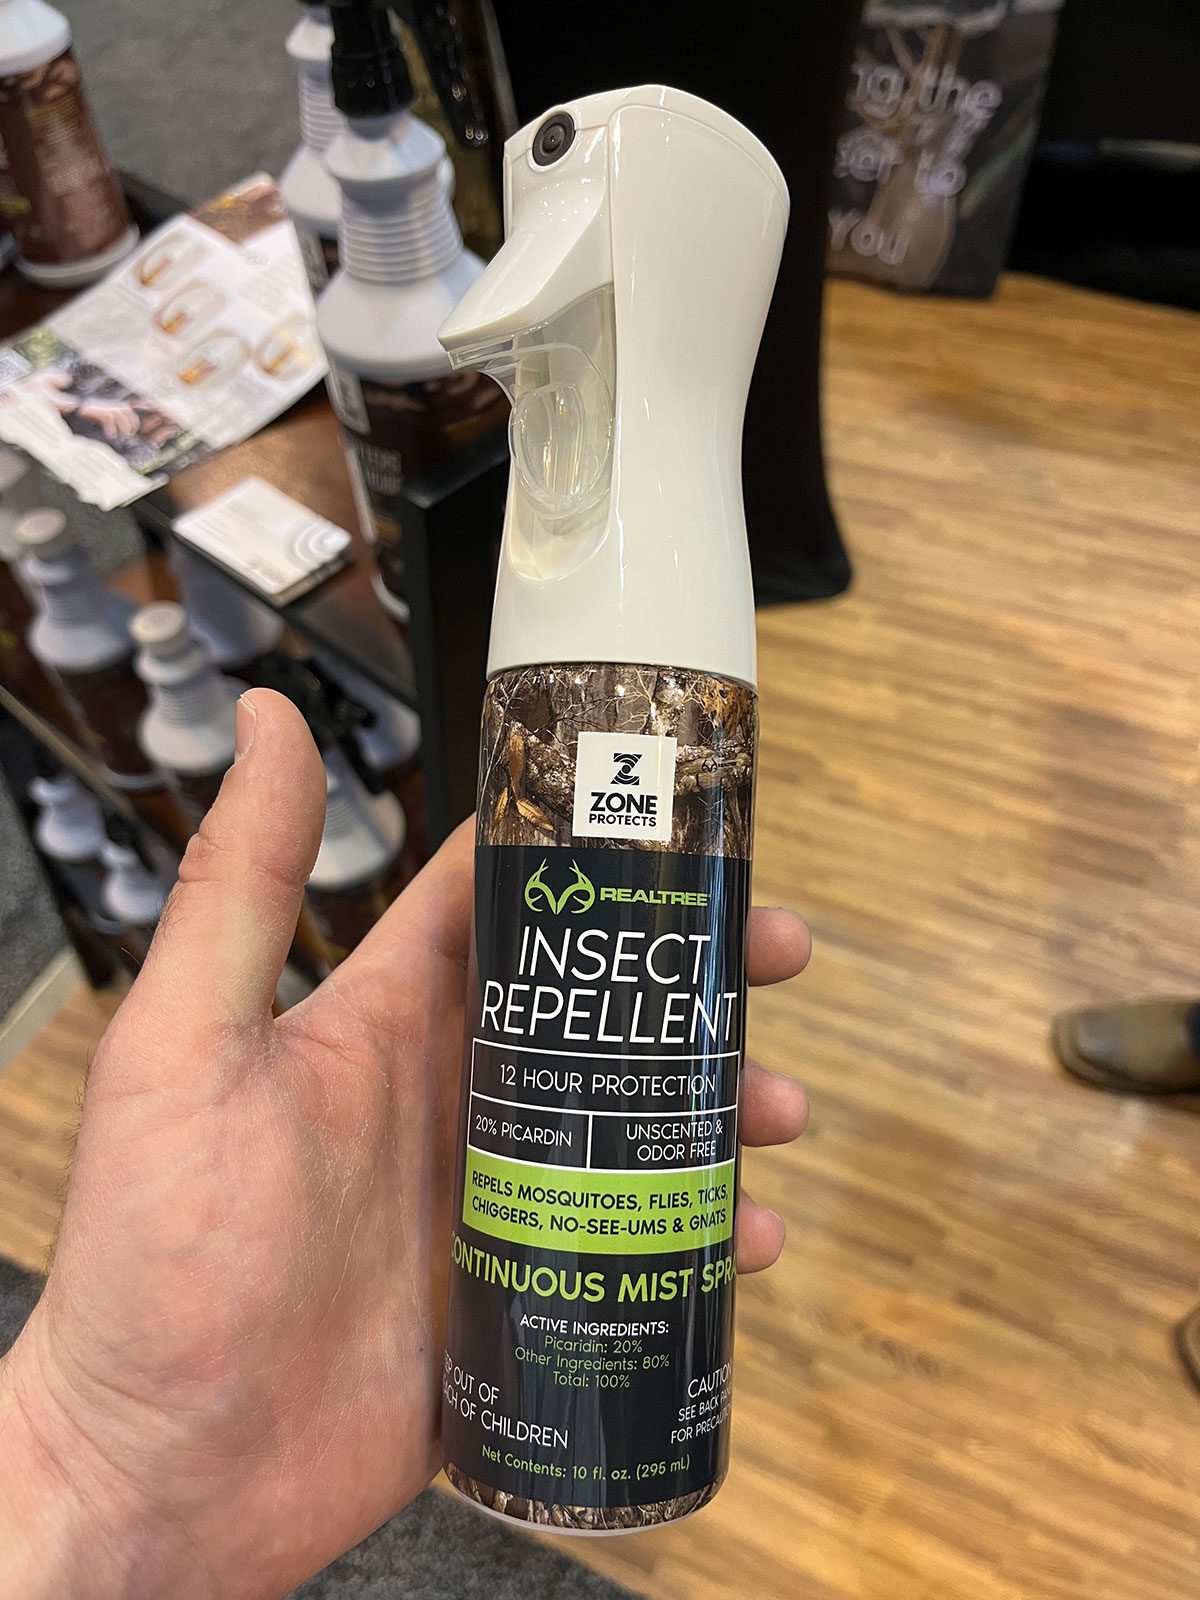 Zone Protects Realtree Insect Repellent